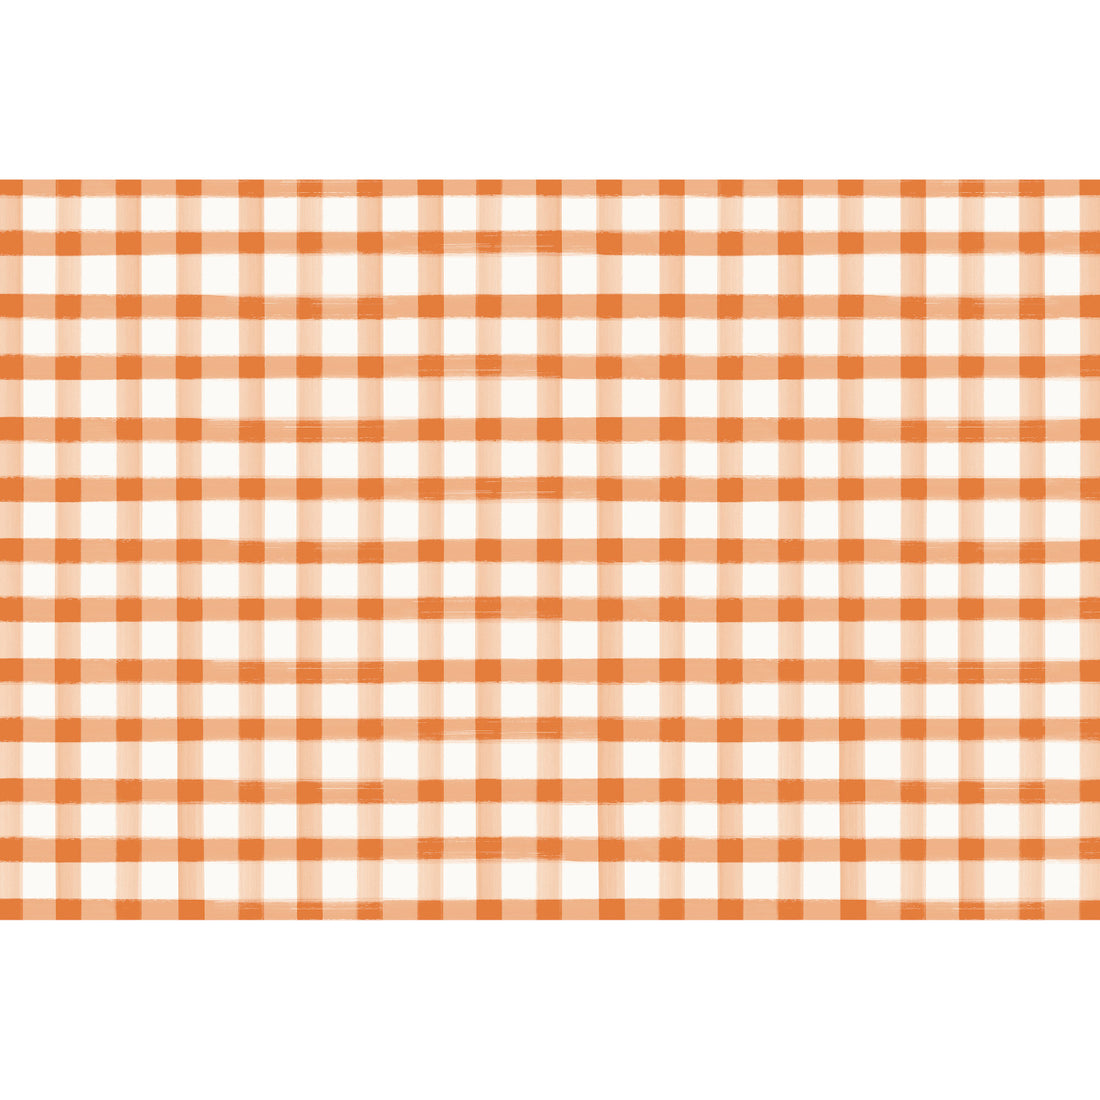 A painted gingham grid check pattern made of light orange lines intersecting at deep orange squares, on a white background.